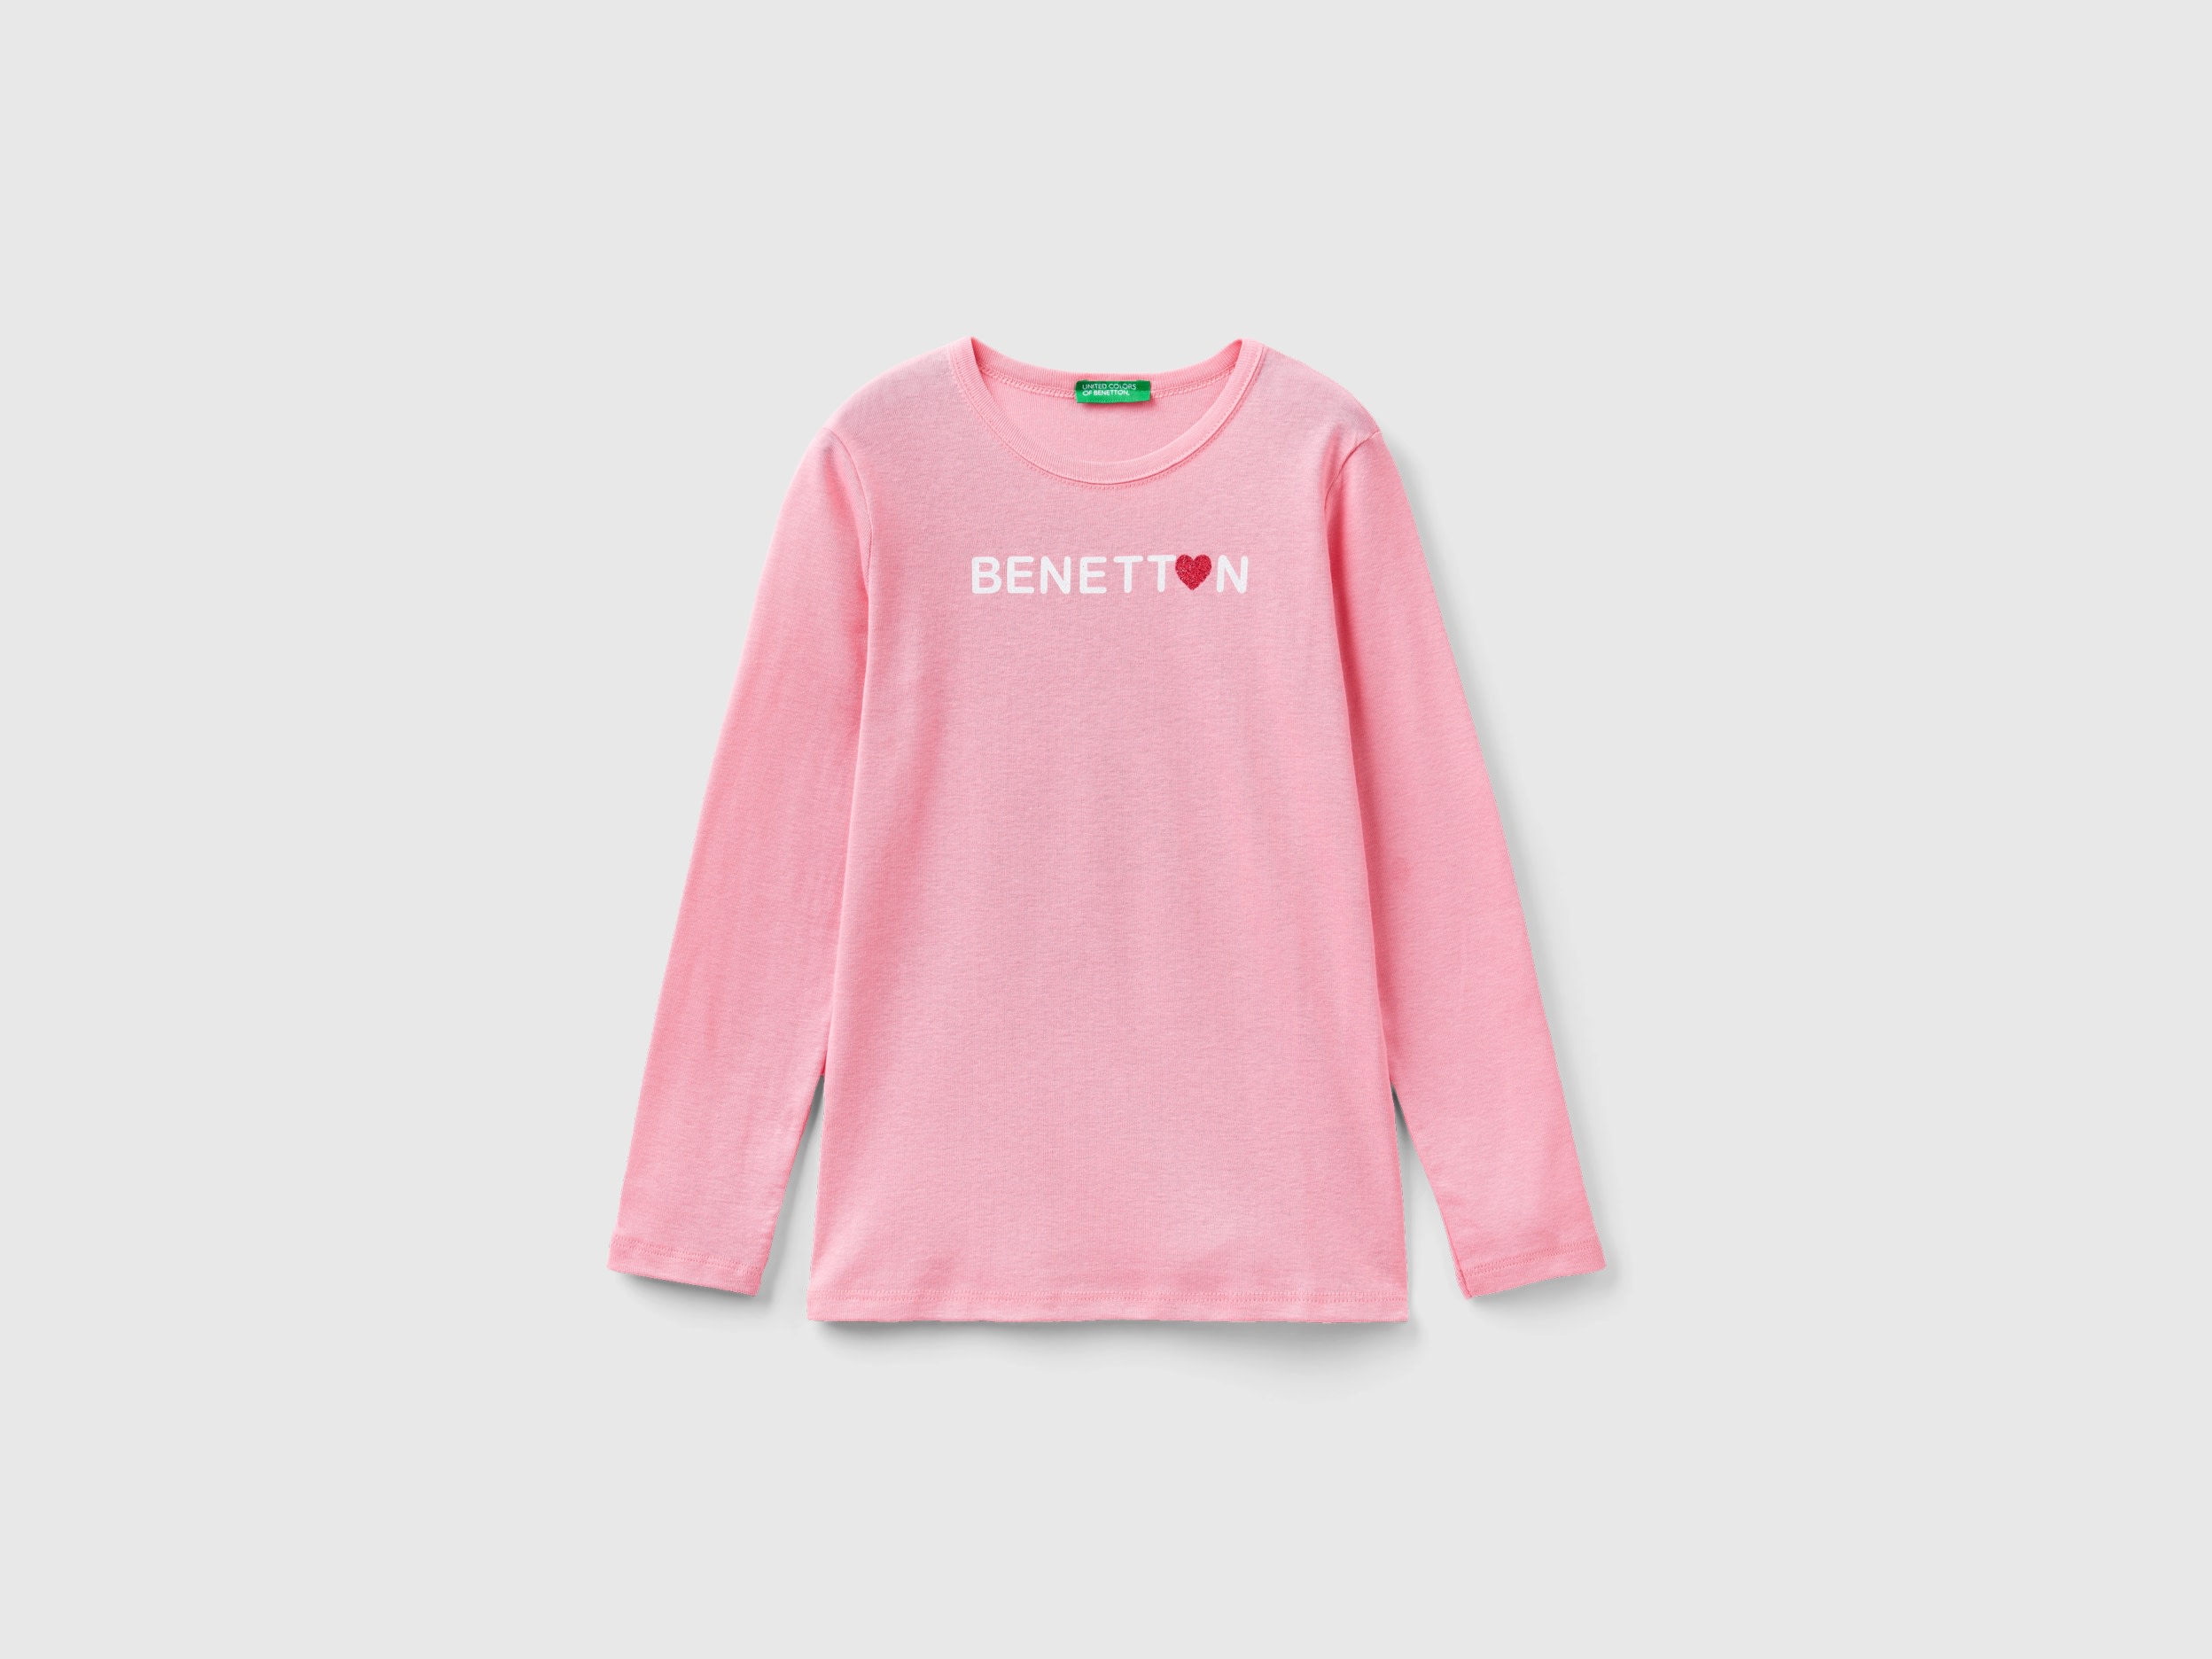 Image of Benetton, Long Sleeve T-shirt With Glitter Print, size L, Pink, Kids